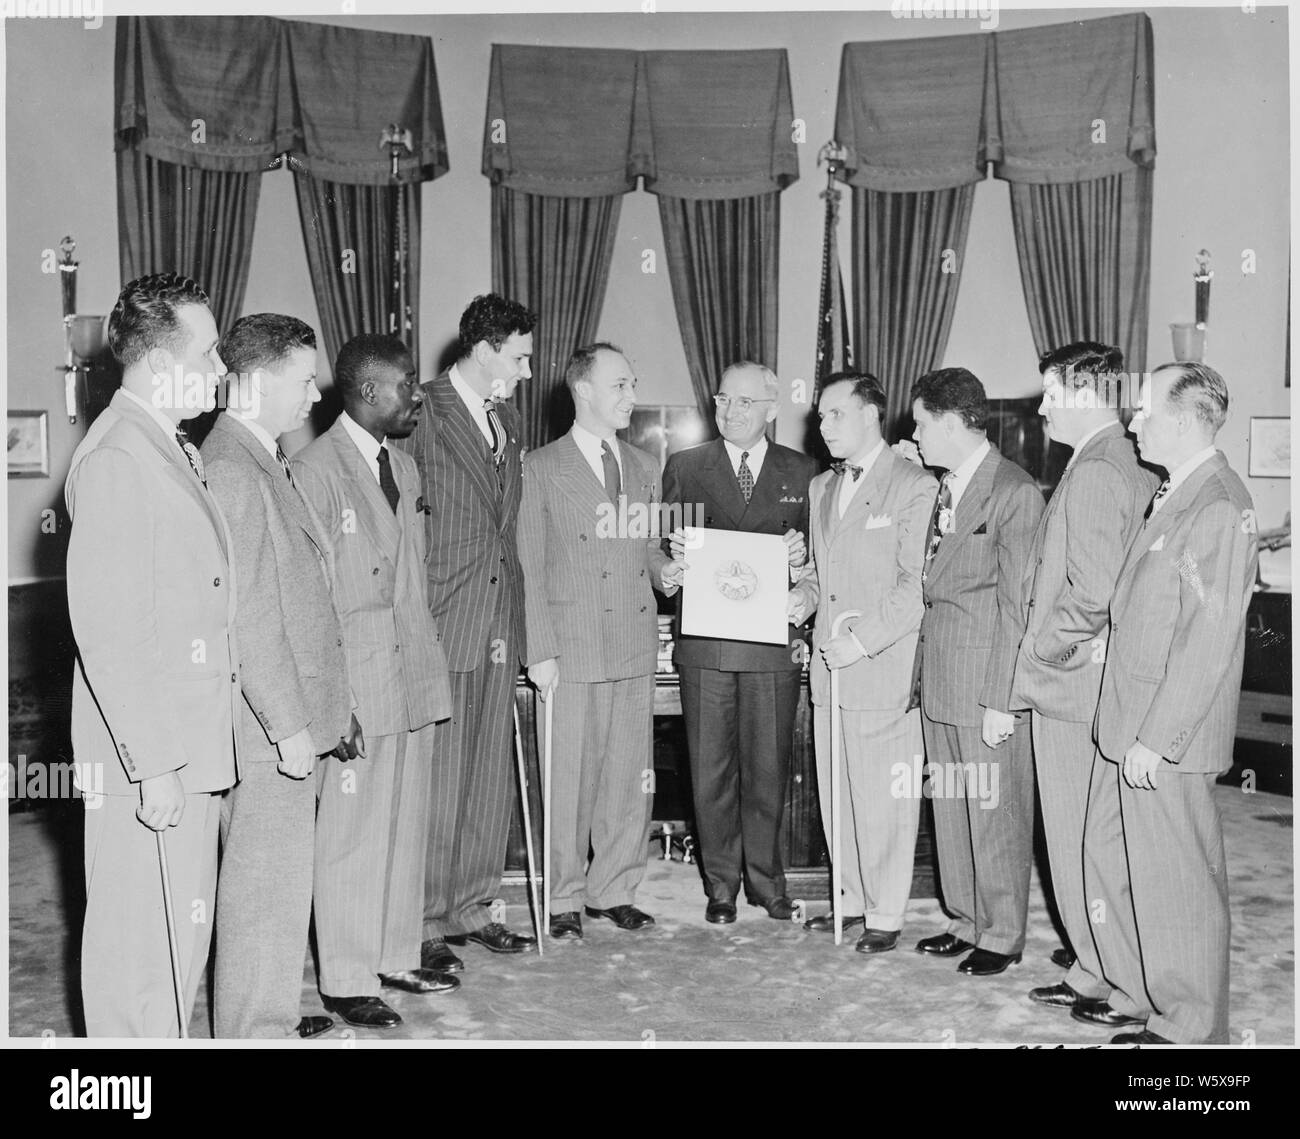 President Truman in the oval office receiving the official insignia of the Blinded Veterans Association. L to R: Lloyd M. Greenwood, Harrison King, James W. Hope, Raymond Frey, Byrum S. Shumway, President Truman, Irving P. Schloss, Robert Pistel, Peter J. McKenna, Jr., and John F. Brady. Stock Photo